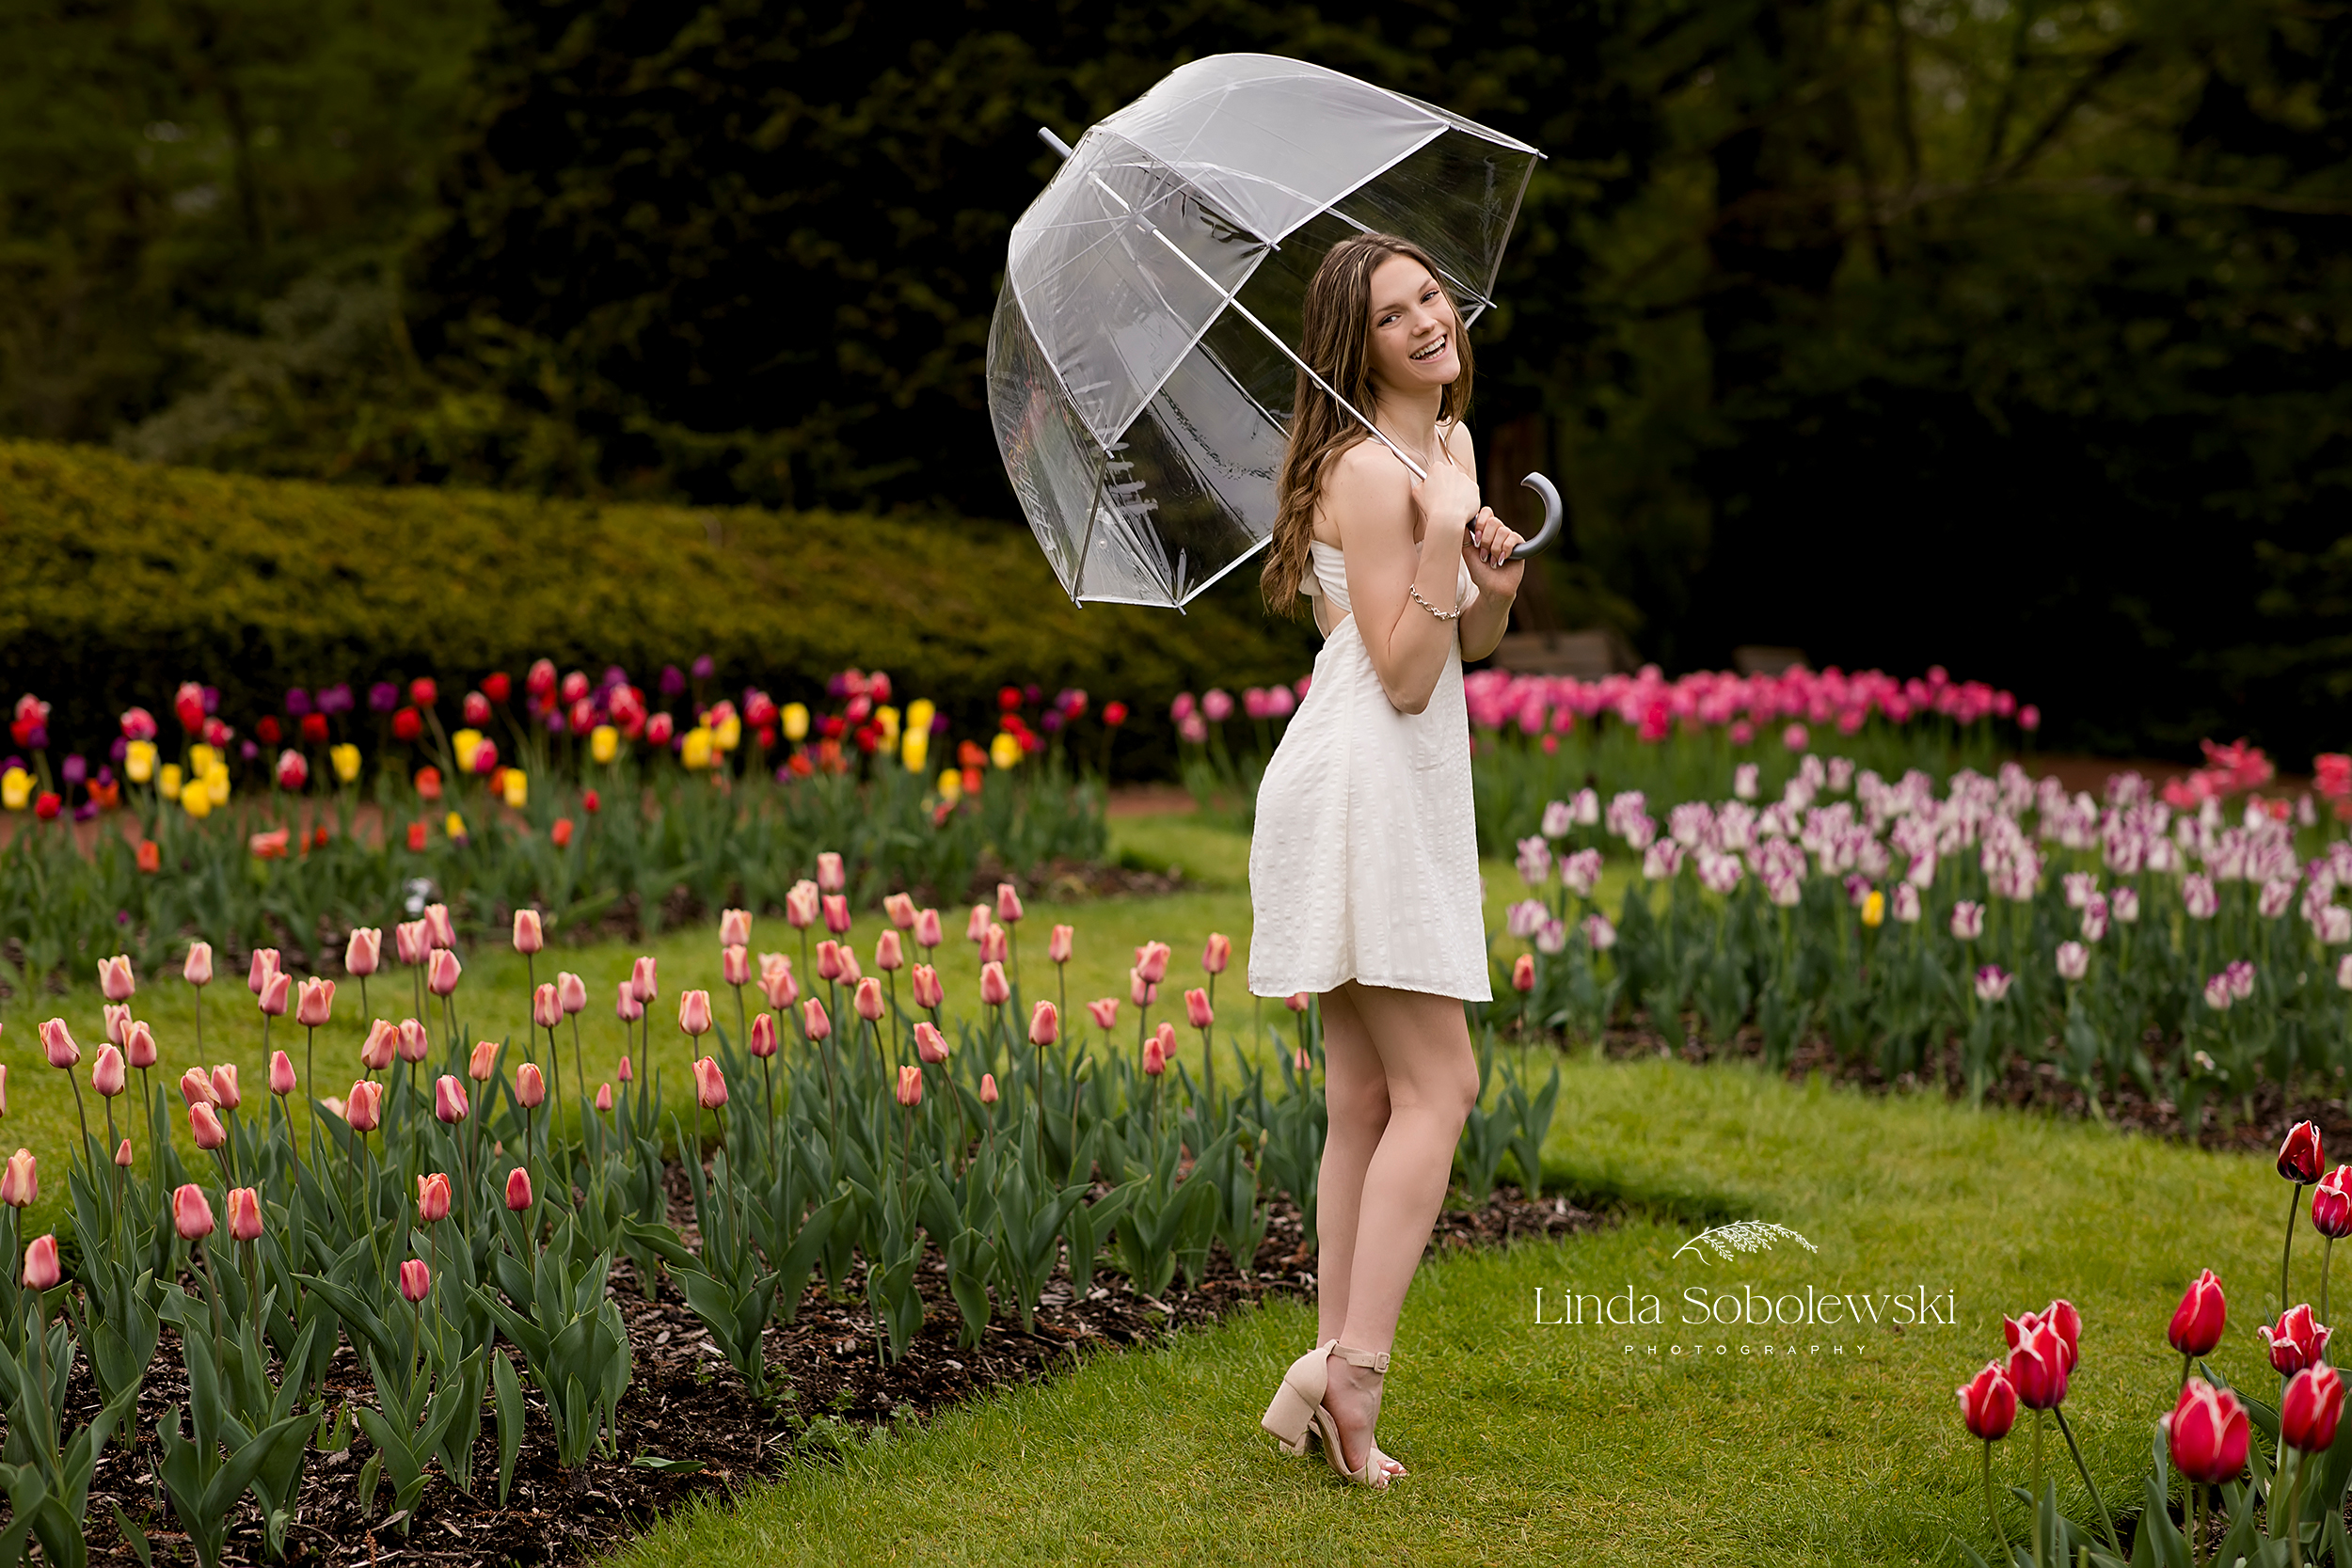 teenage girl in white dress standing in a tulip garden, Senior photo session at Elizabeth State Park, Westbrook, CT Photographer